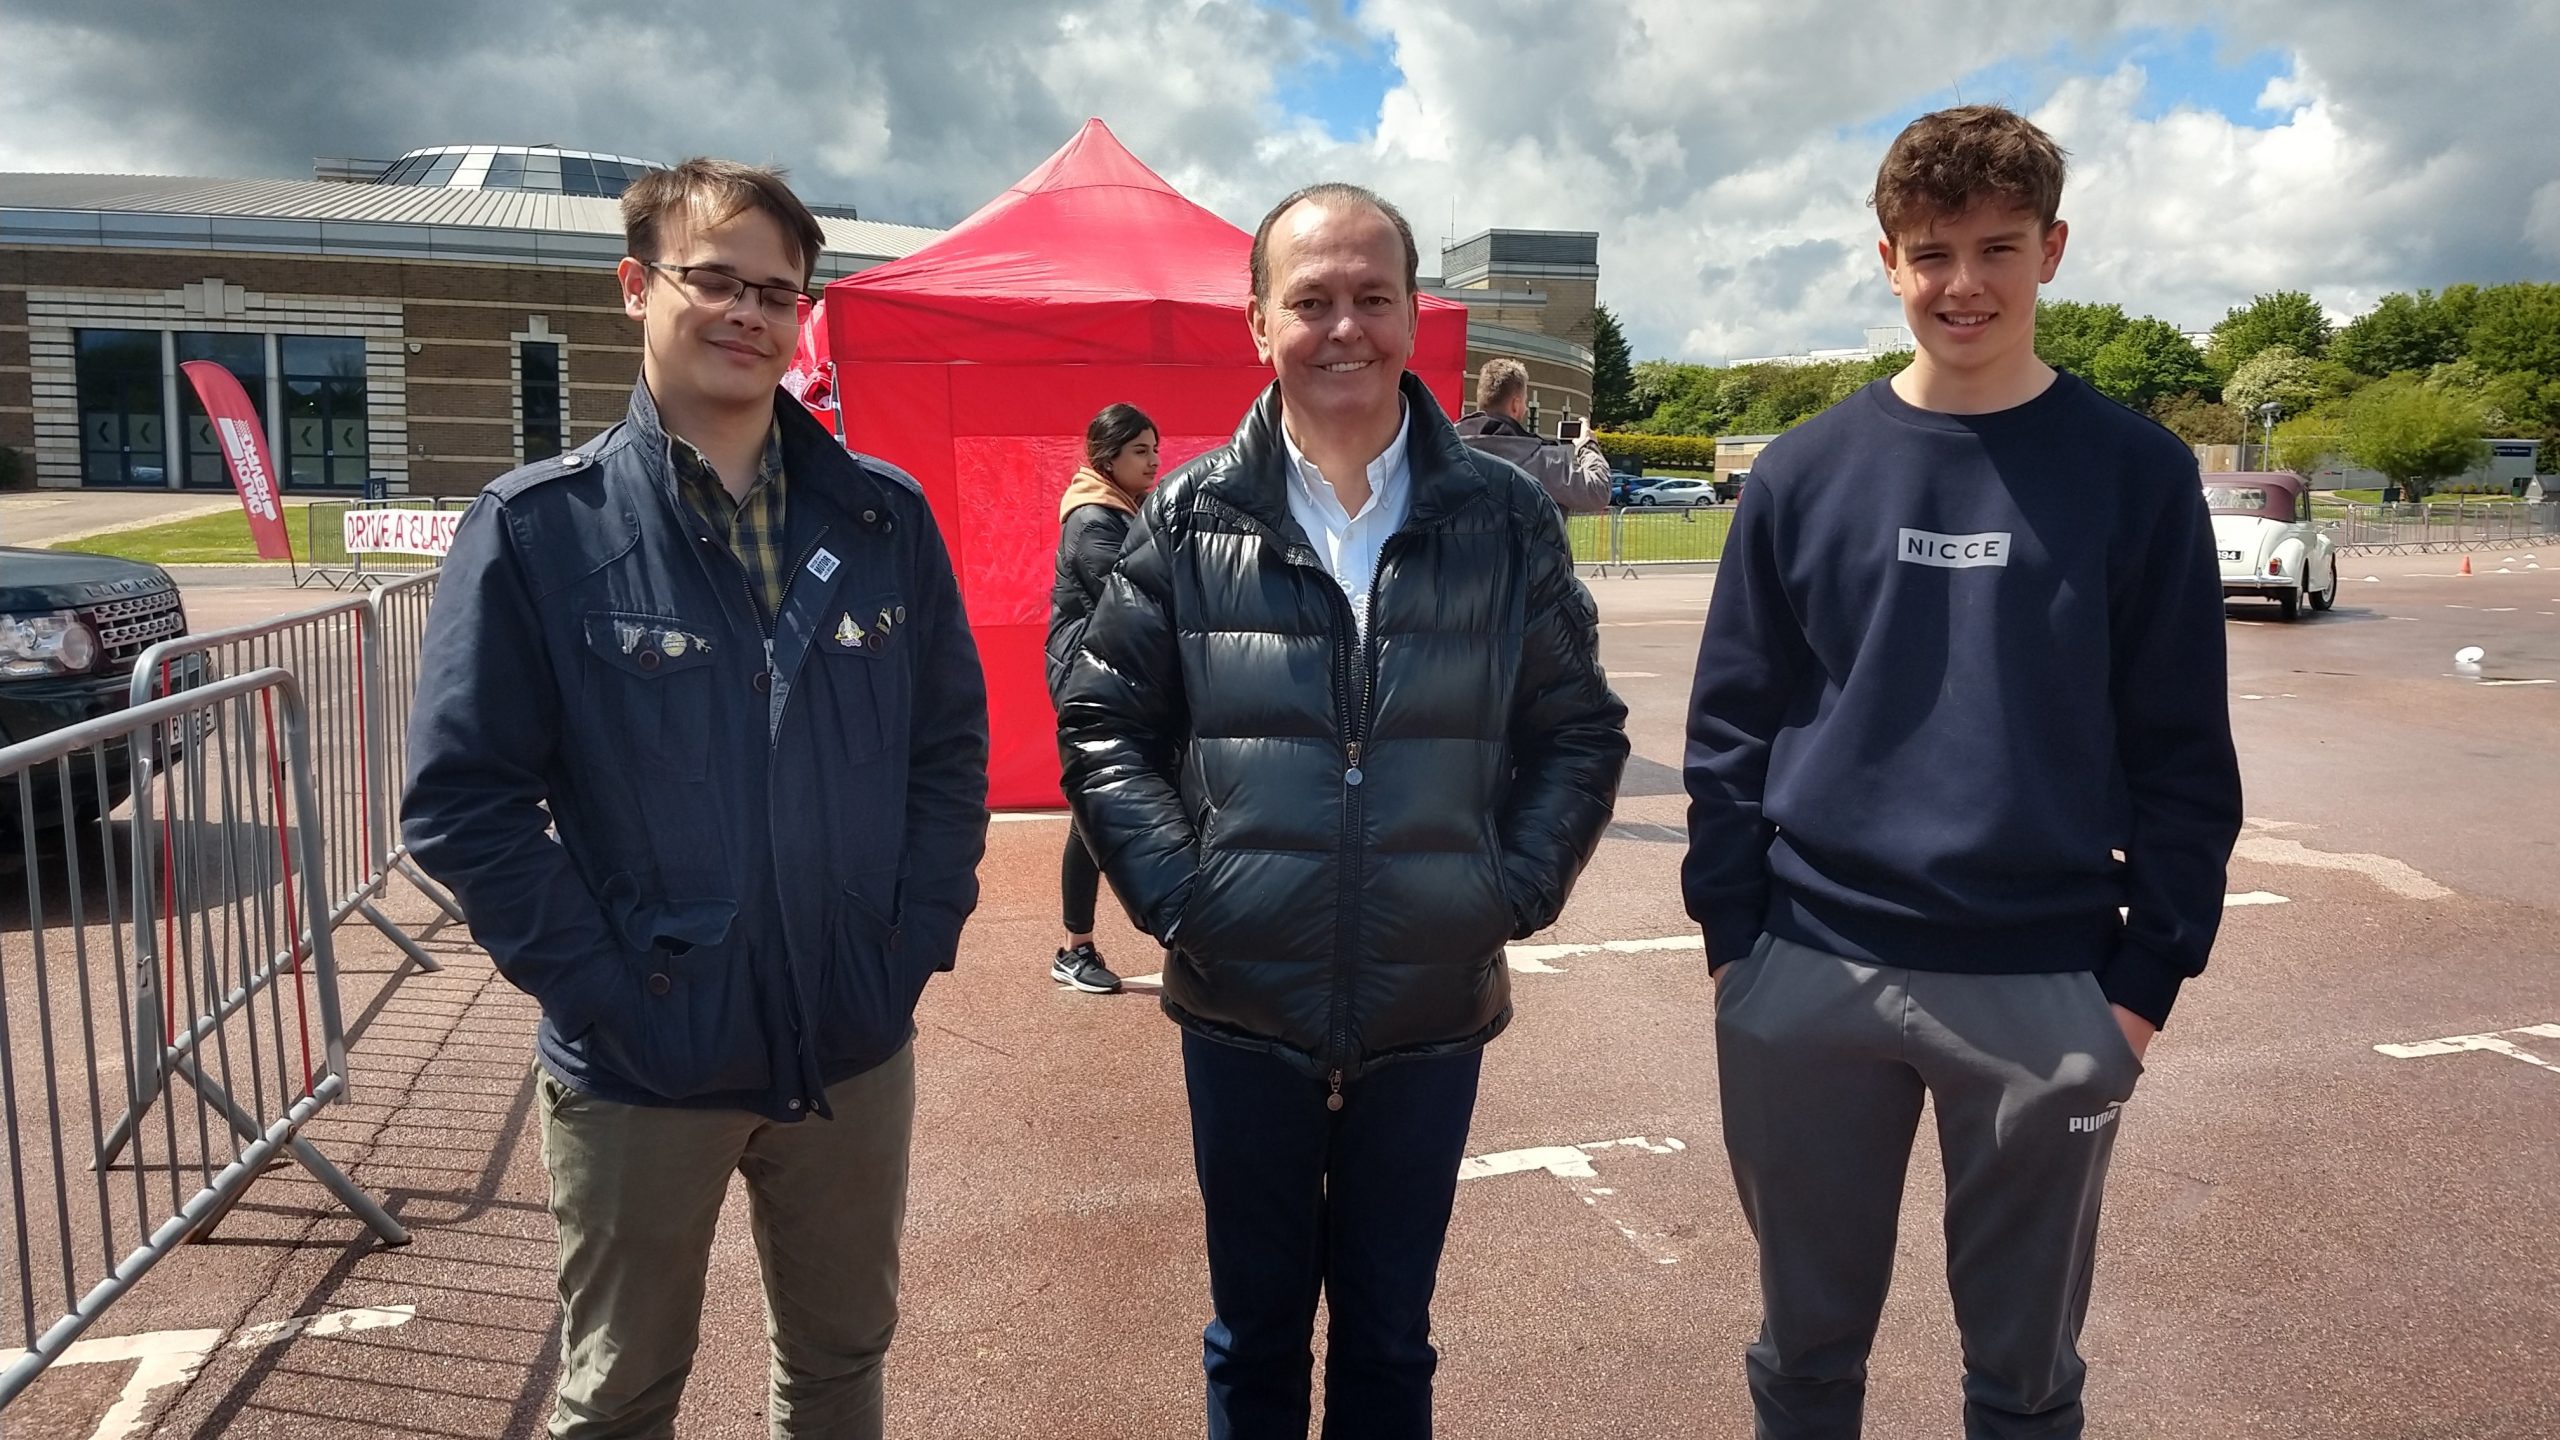 Young Drivers, classic car experience, Quentin Willson, British Motor Museum, Gaydon